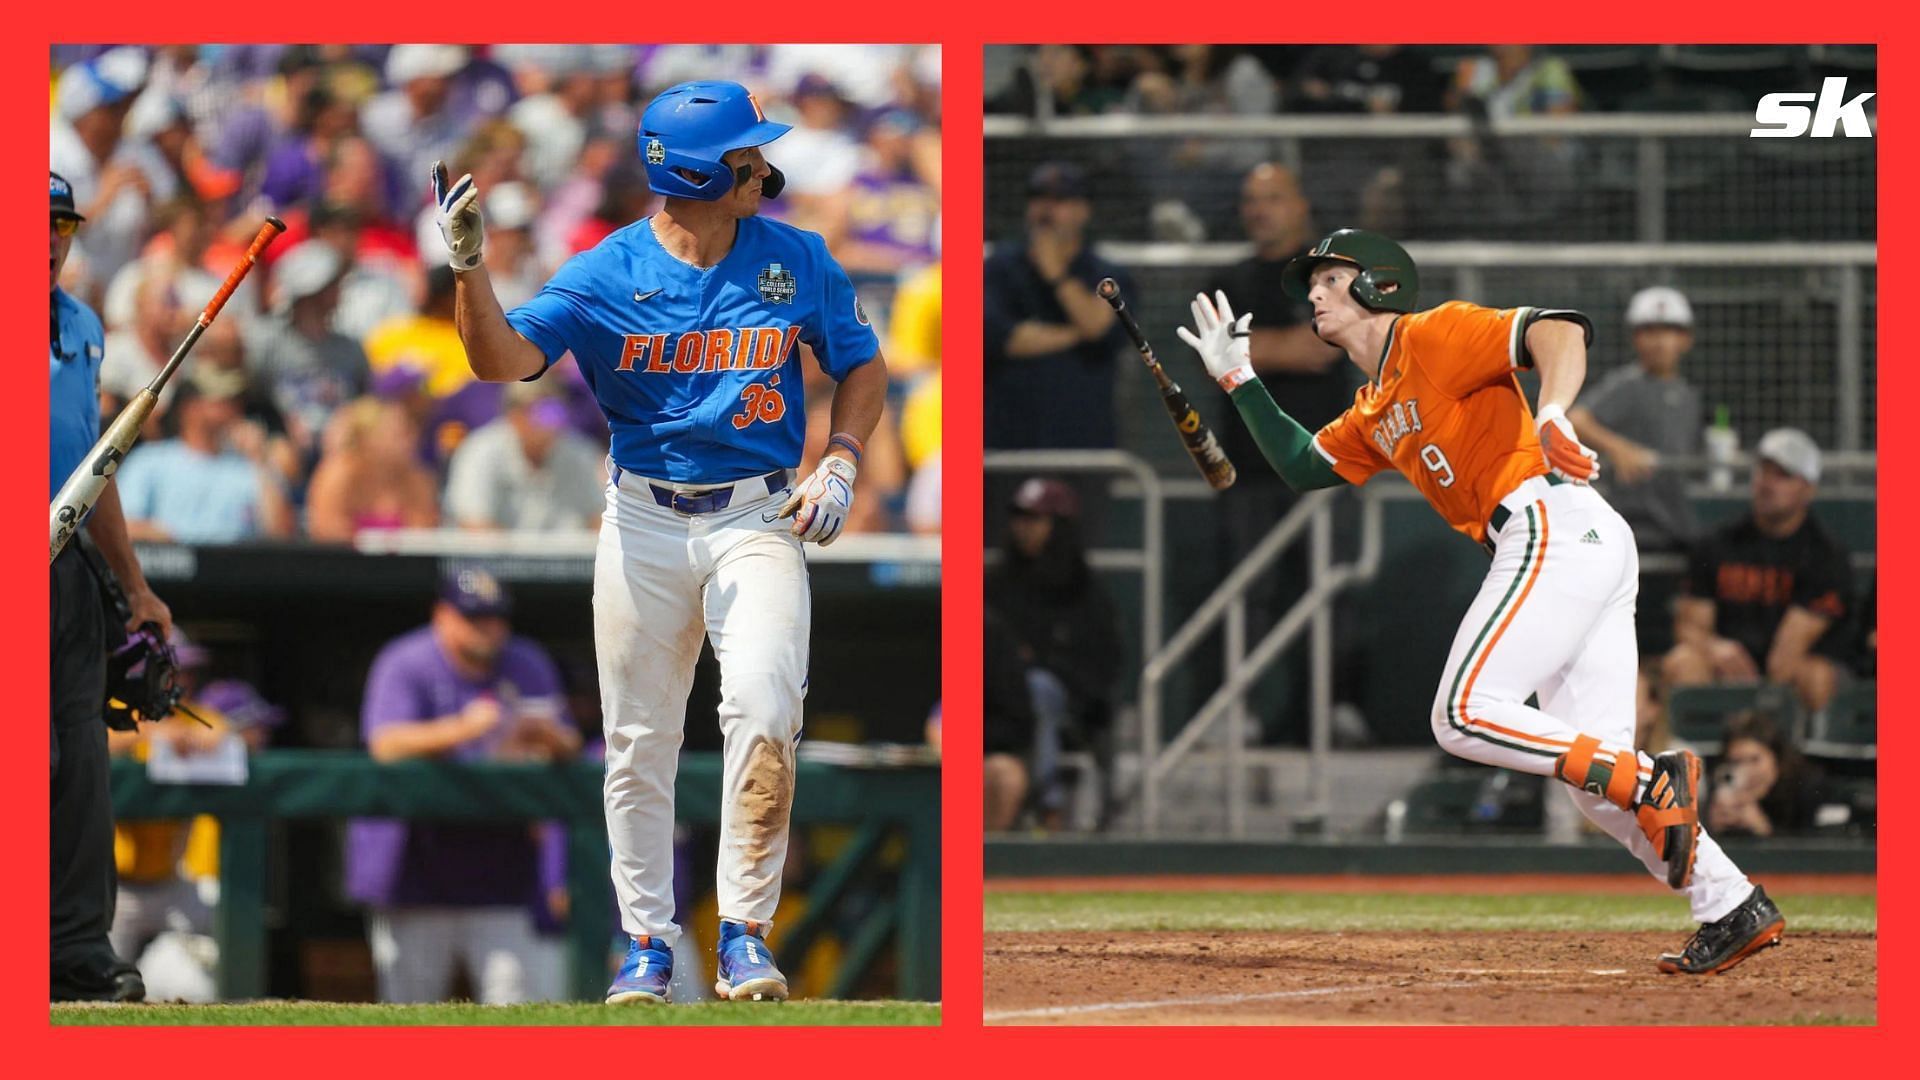 Who are the best left fielders in the MLB Draft?